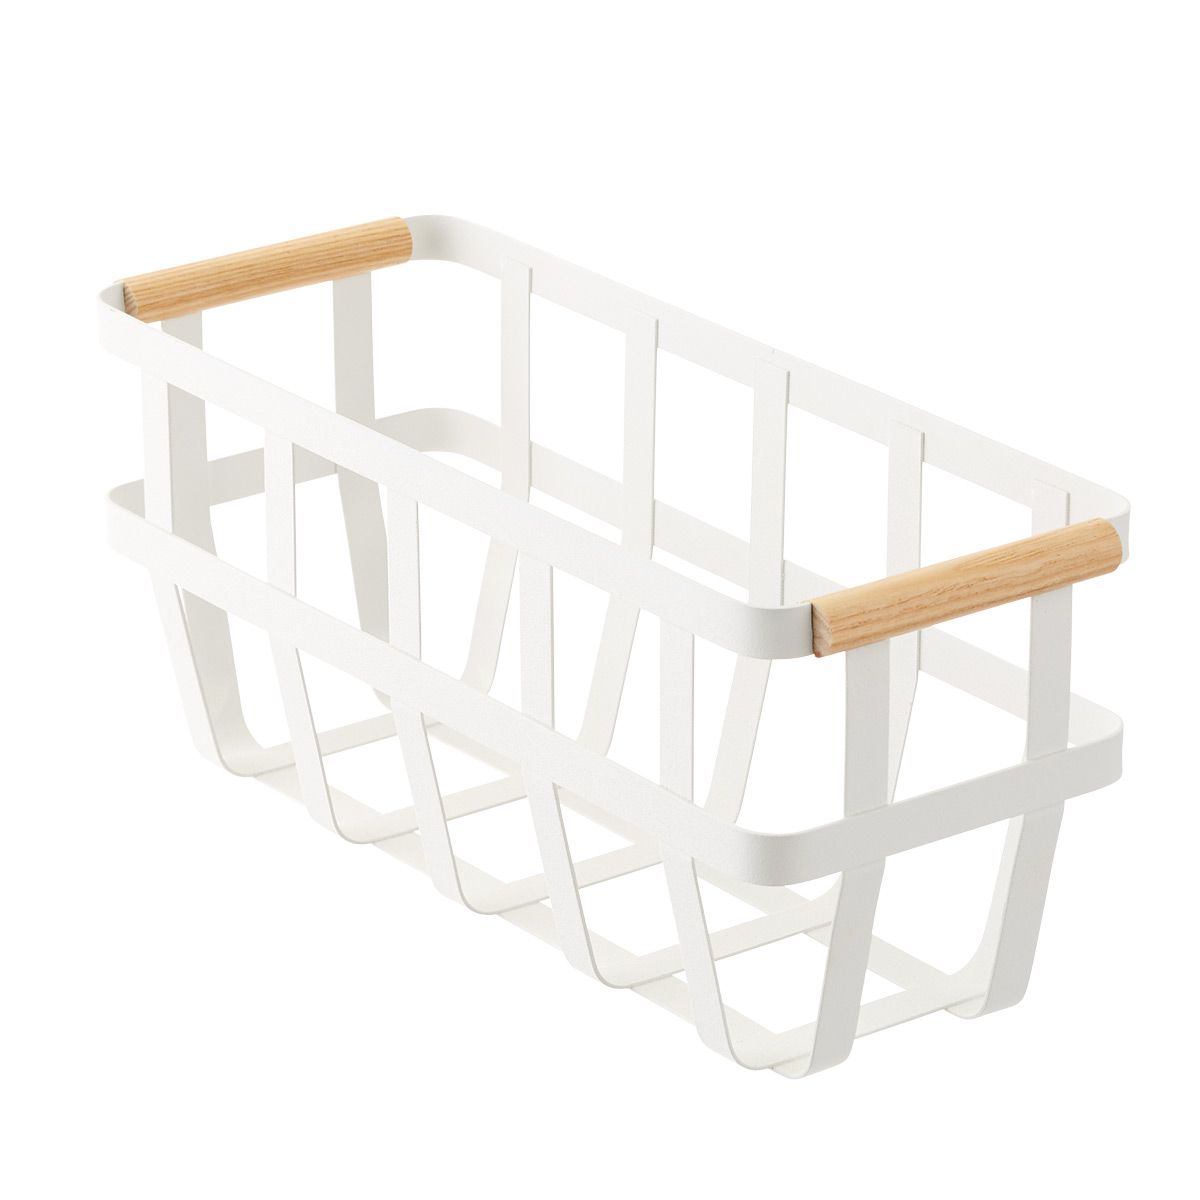 Yamazaki Slim Tosca Basket w/ Wooden Handles White/Natural | The Container Store